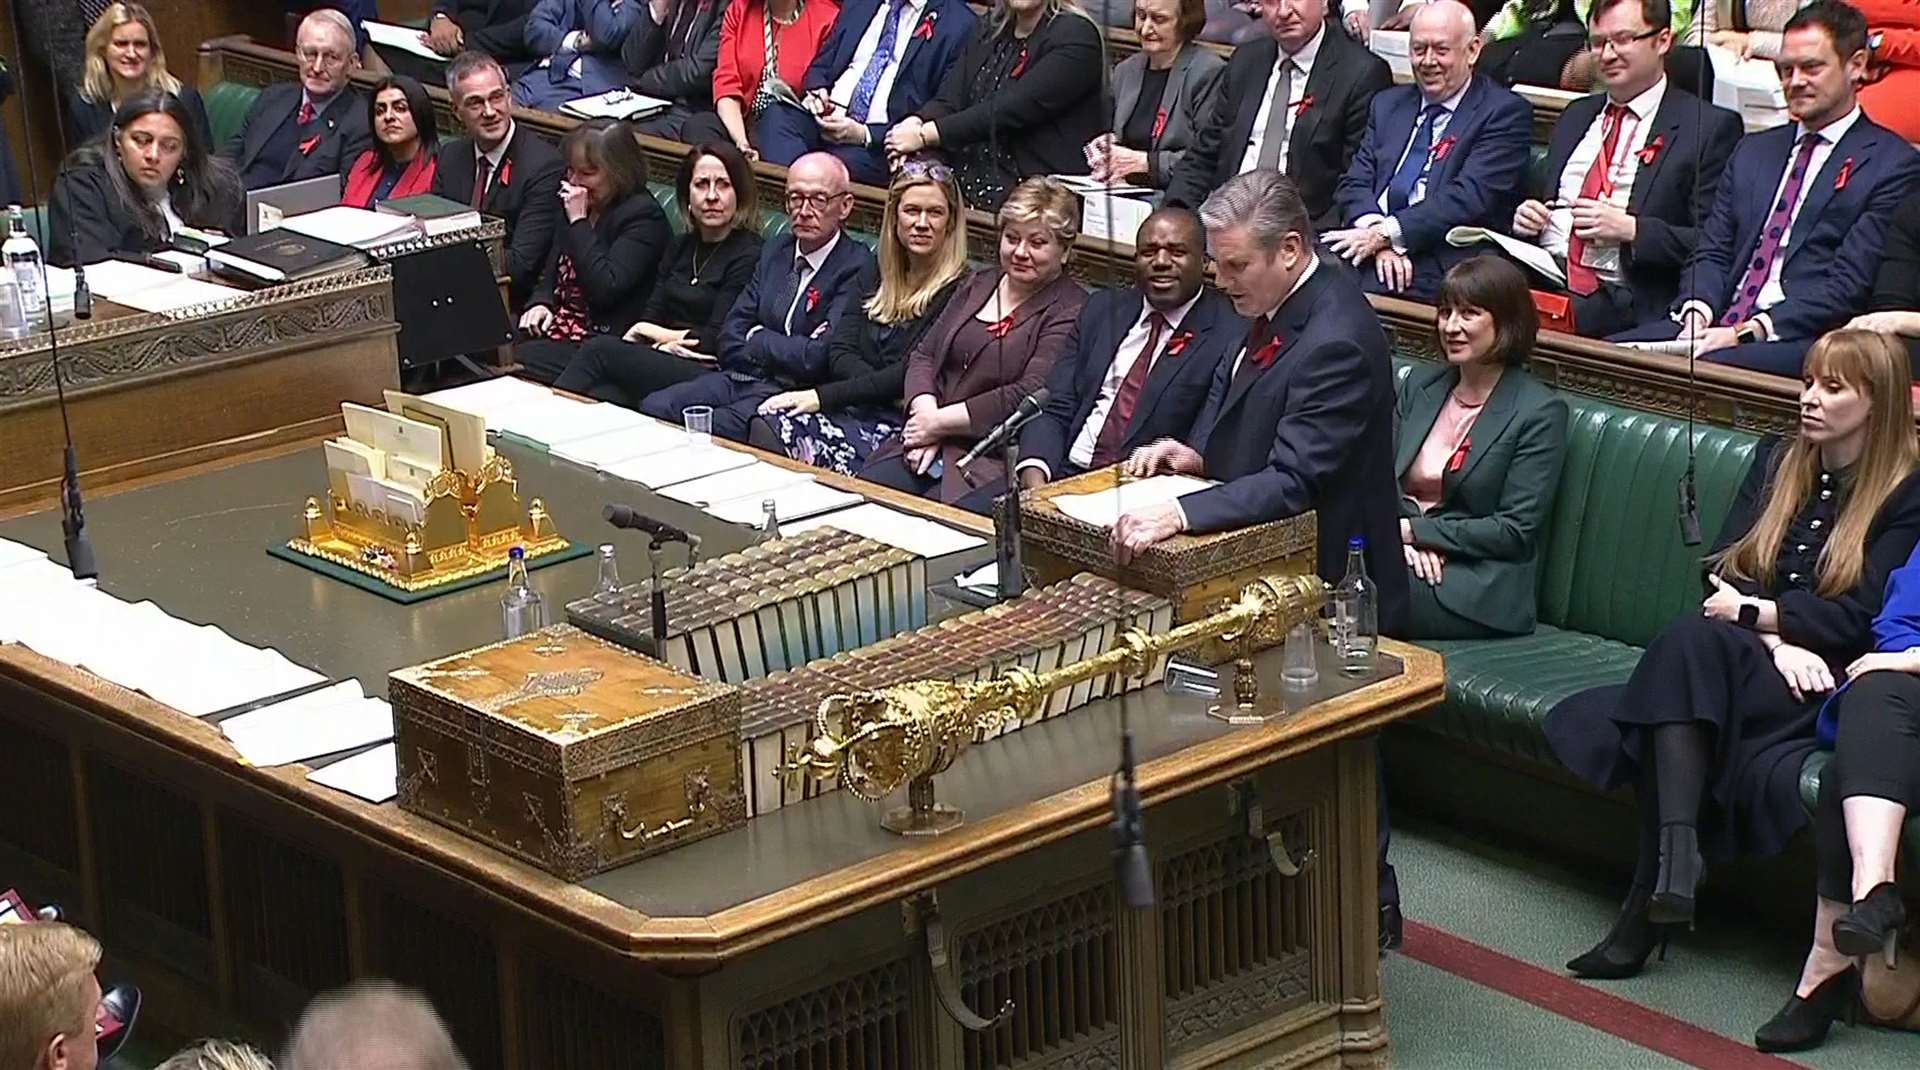 Labour leader Keir Starmer during Prime Minister’s Questions (House of Commons/UK Parliament/PA)